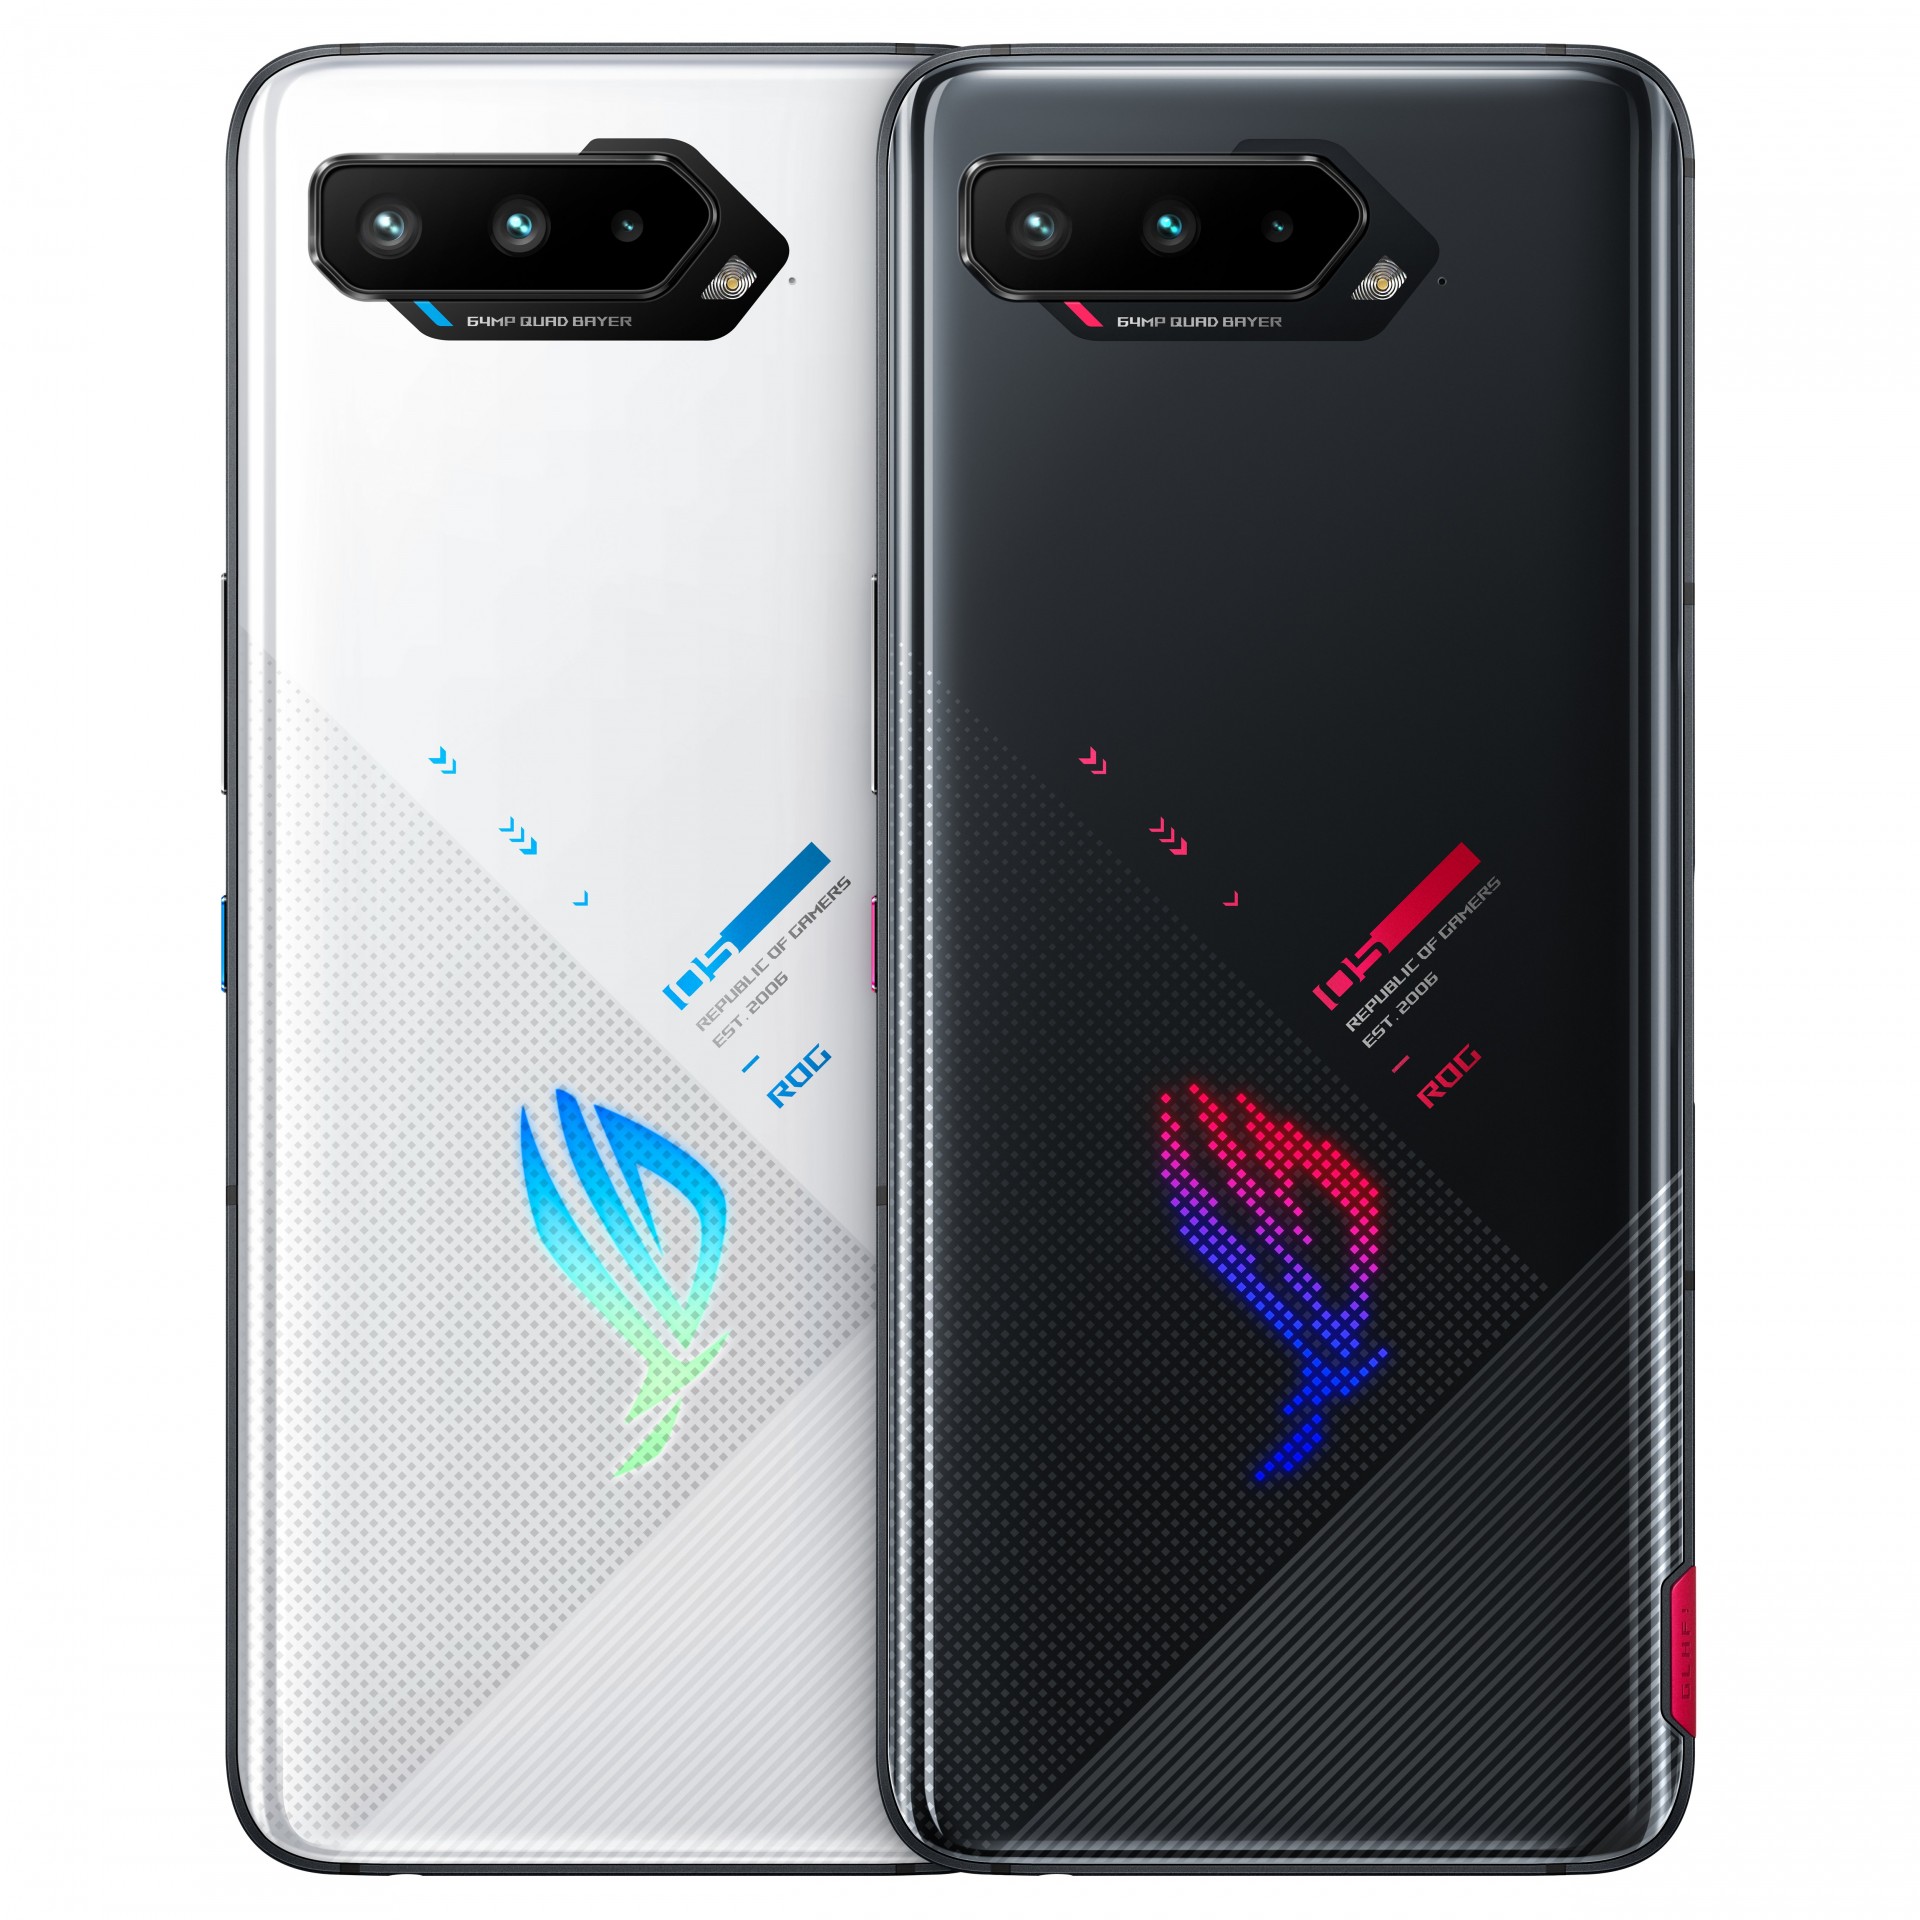 Asus ROG Phone 5 specs and price and features